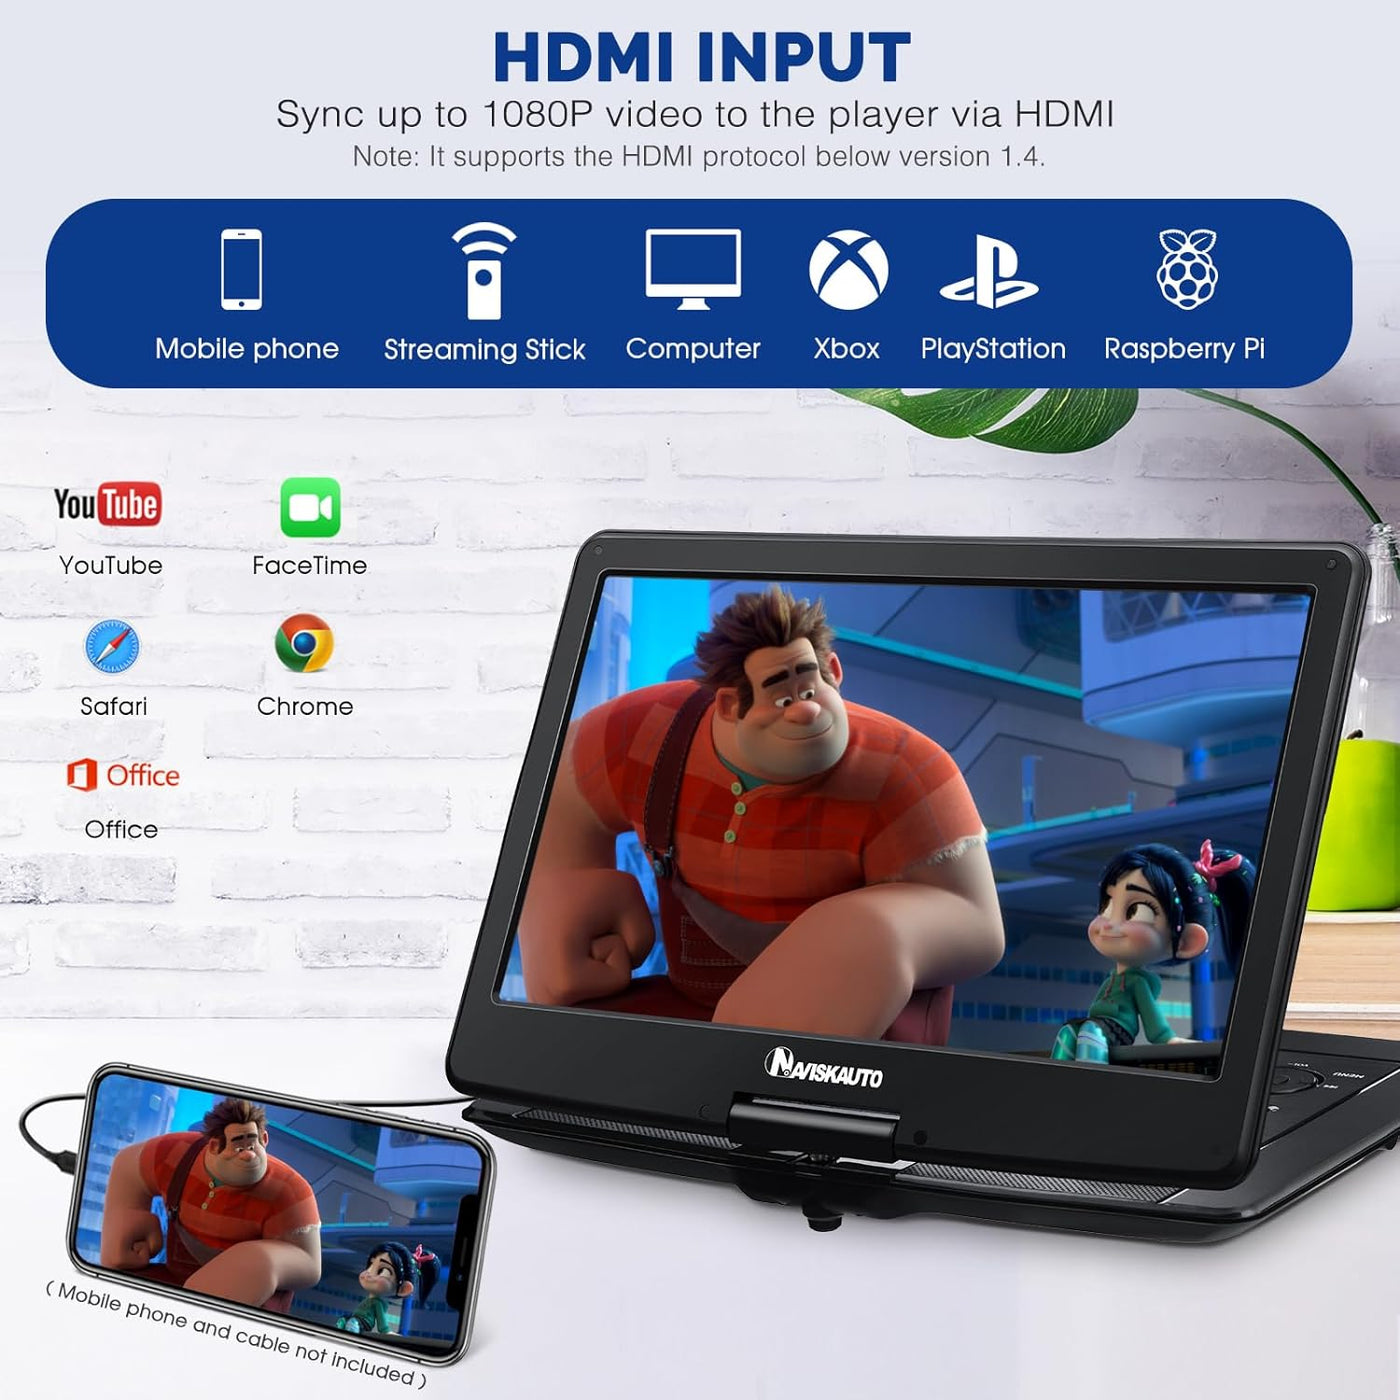 BOIFUN 17.5 Portable DVD Player with 15.6 Large HD Screen, 6 Hours  Rechargeable Battery, Support USB/SD Card/Sync TV and Multiple Disc  Formats, High